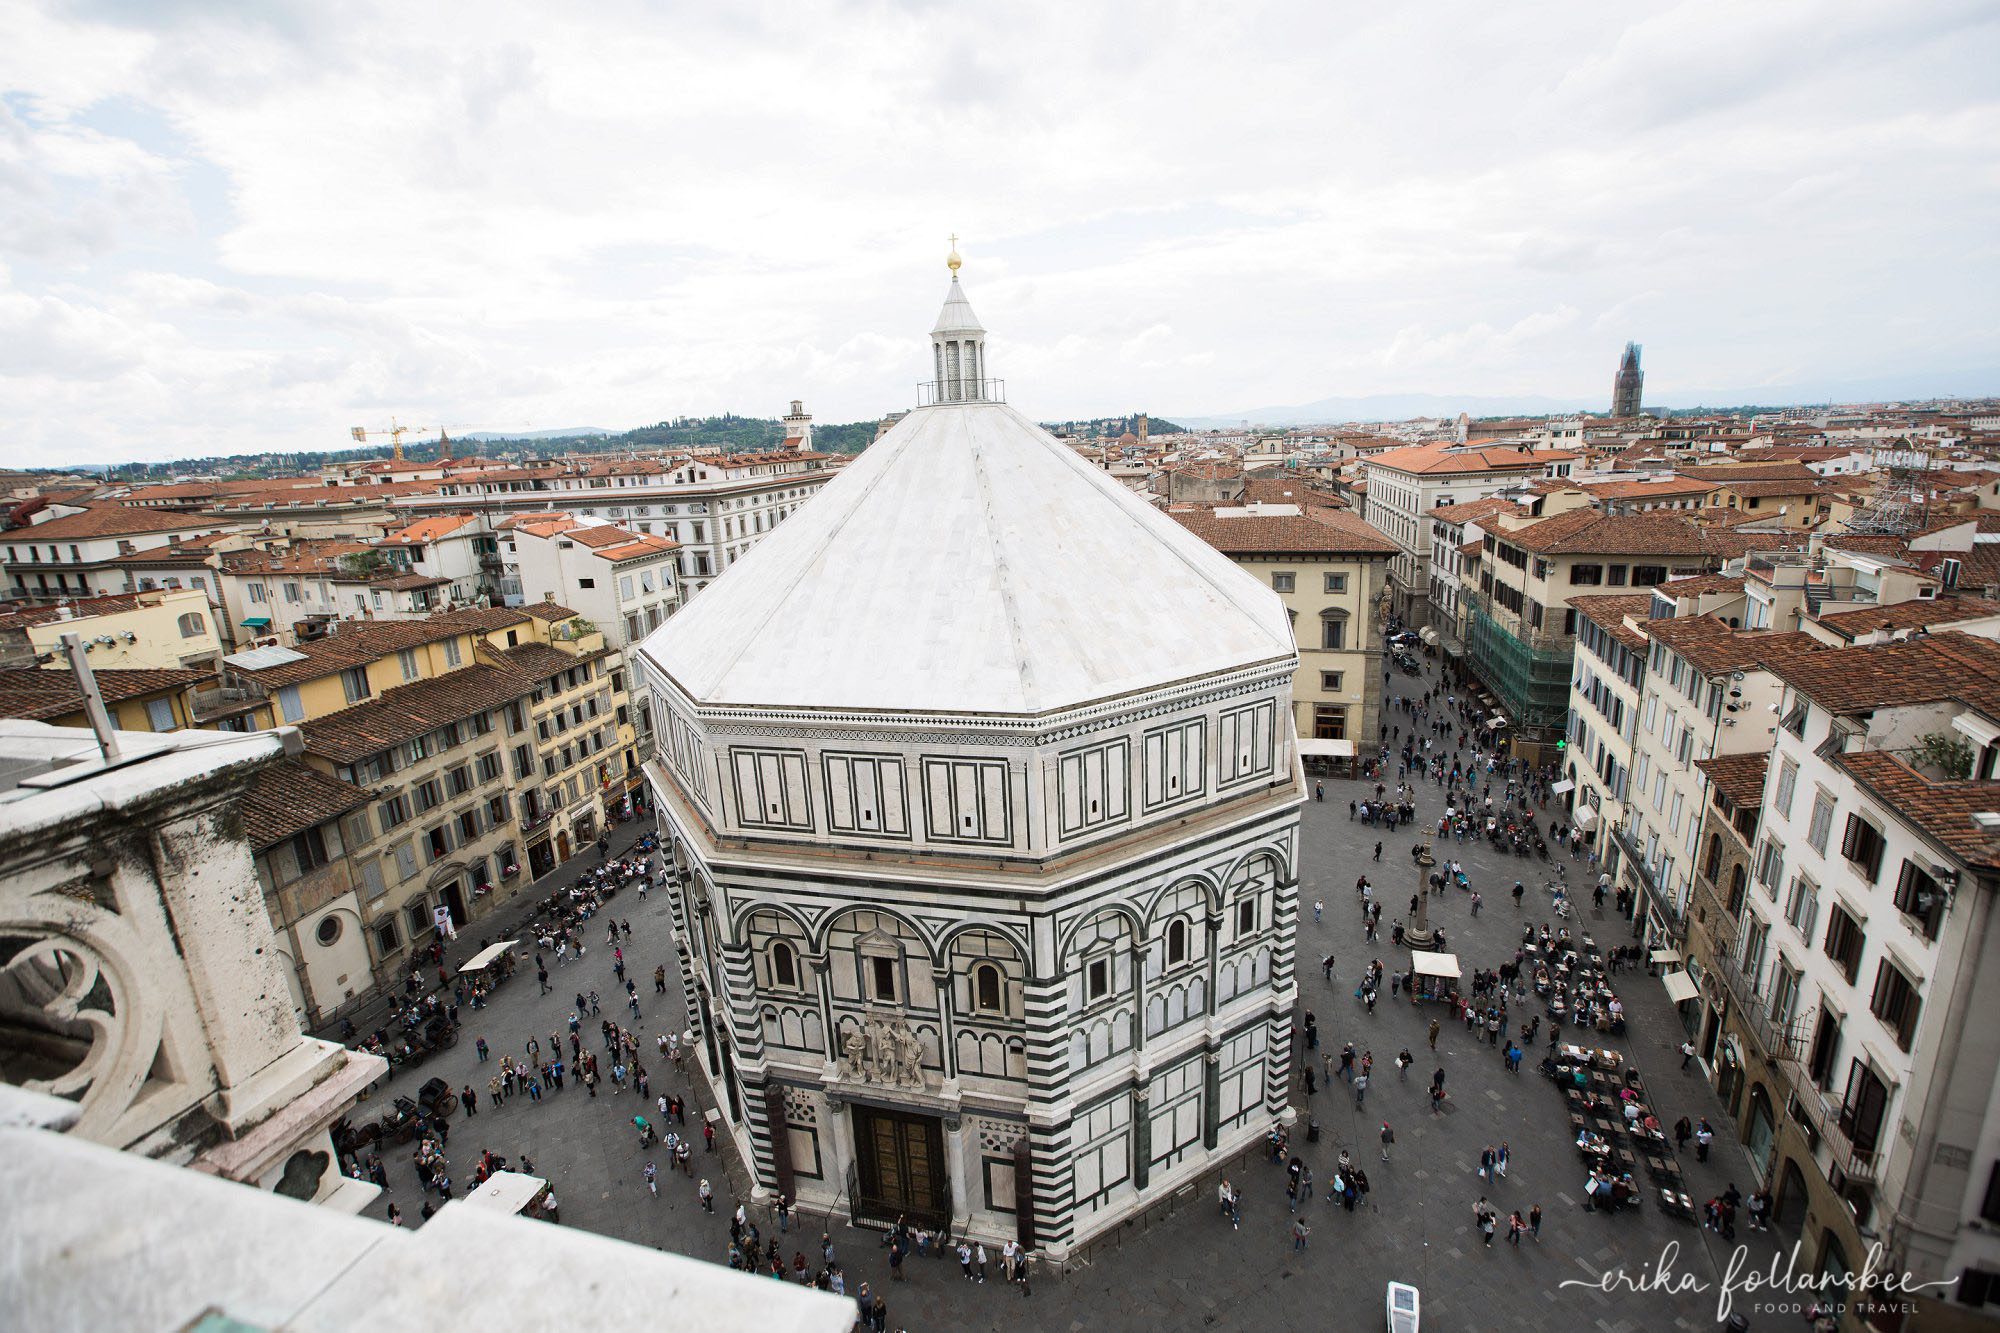 View of the Baptistery from the terraces of the Duomo